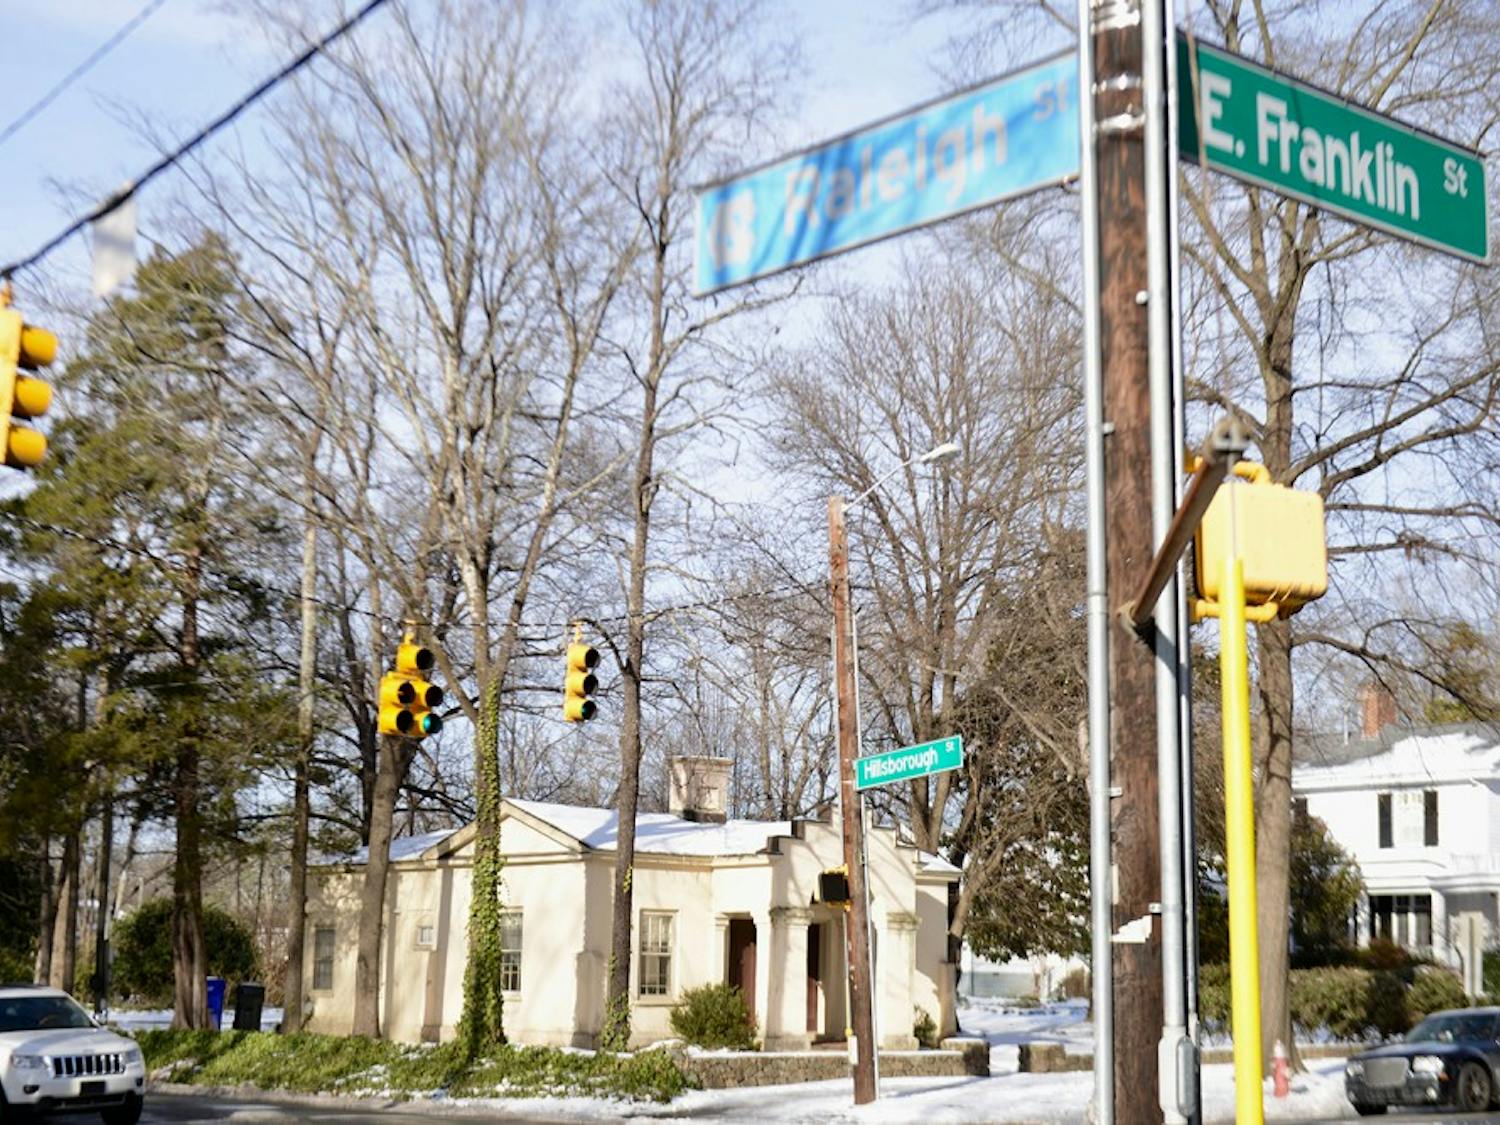 A left turning traffic light was installed at the intersection of Raleigh Street and East Franklin Street.&nbsp;